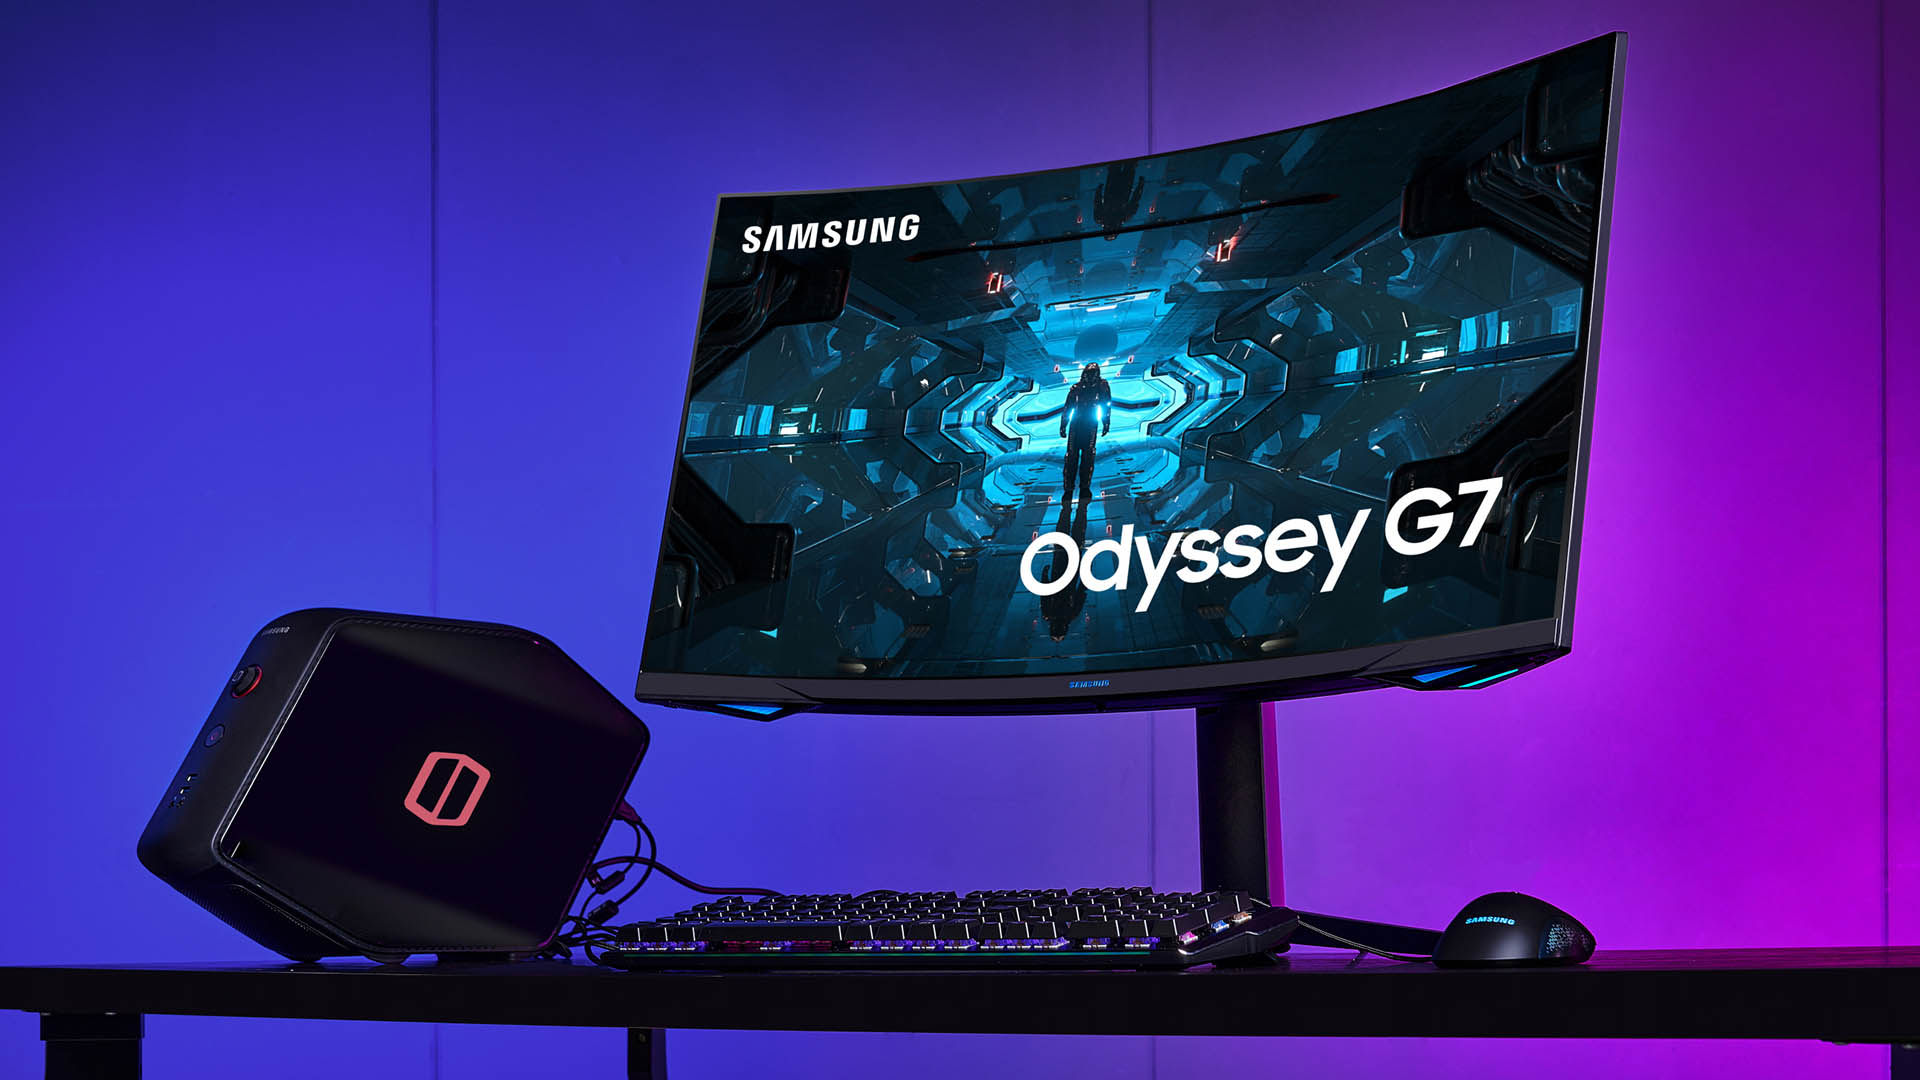 Can't enable game hdr on samsung odyssey g6 27 : r/Monitors